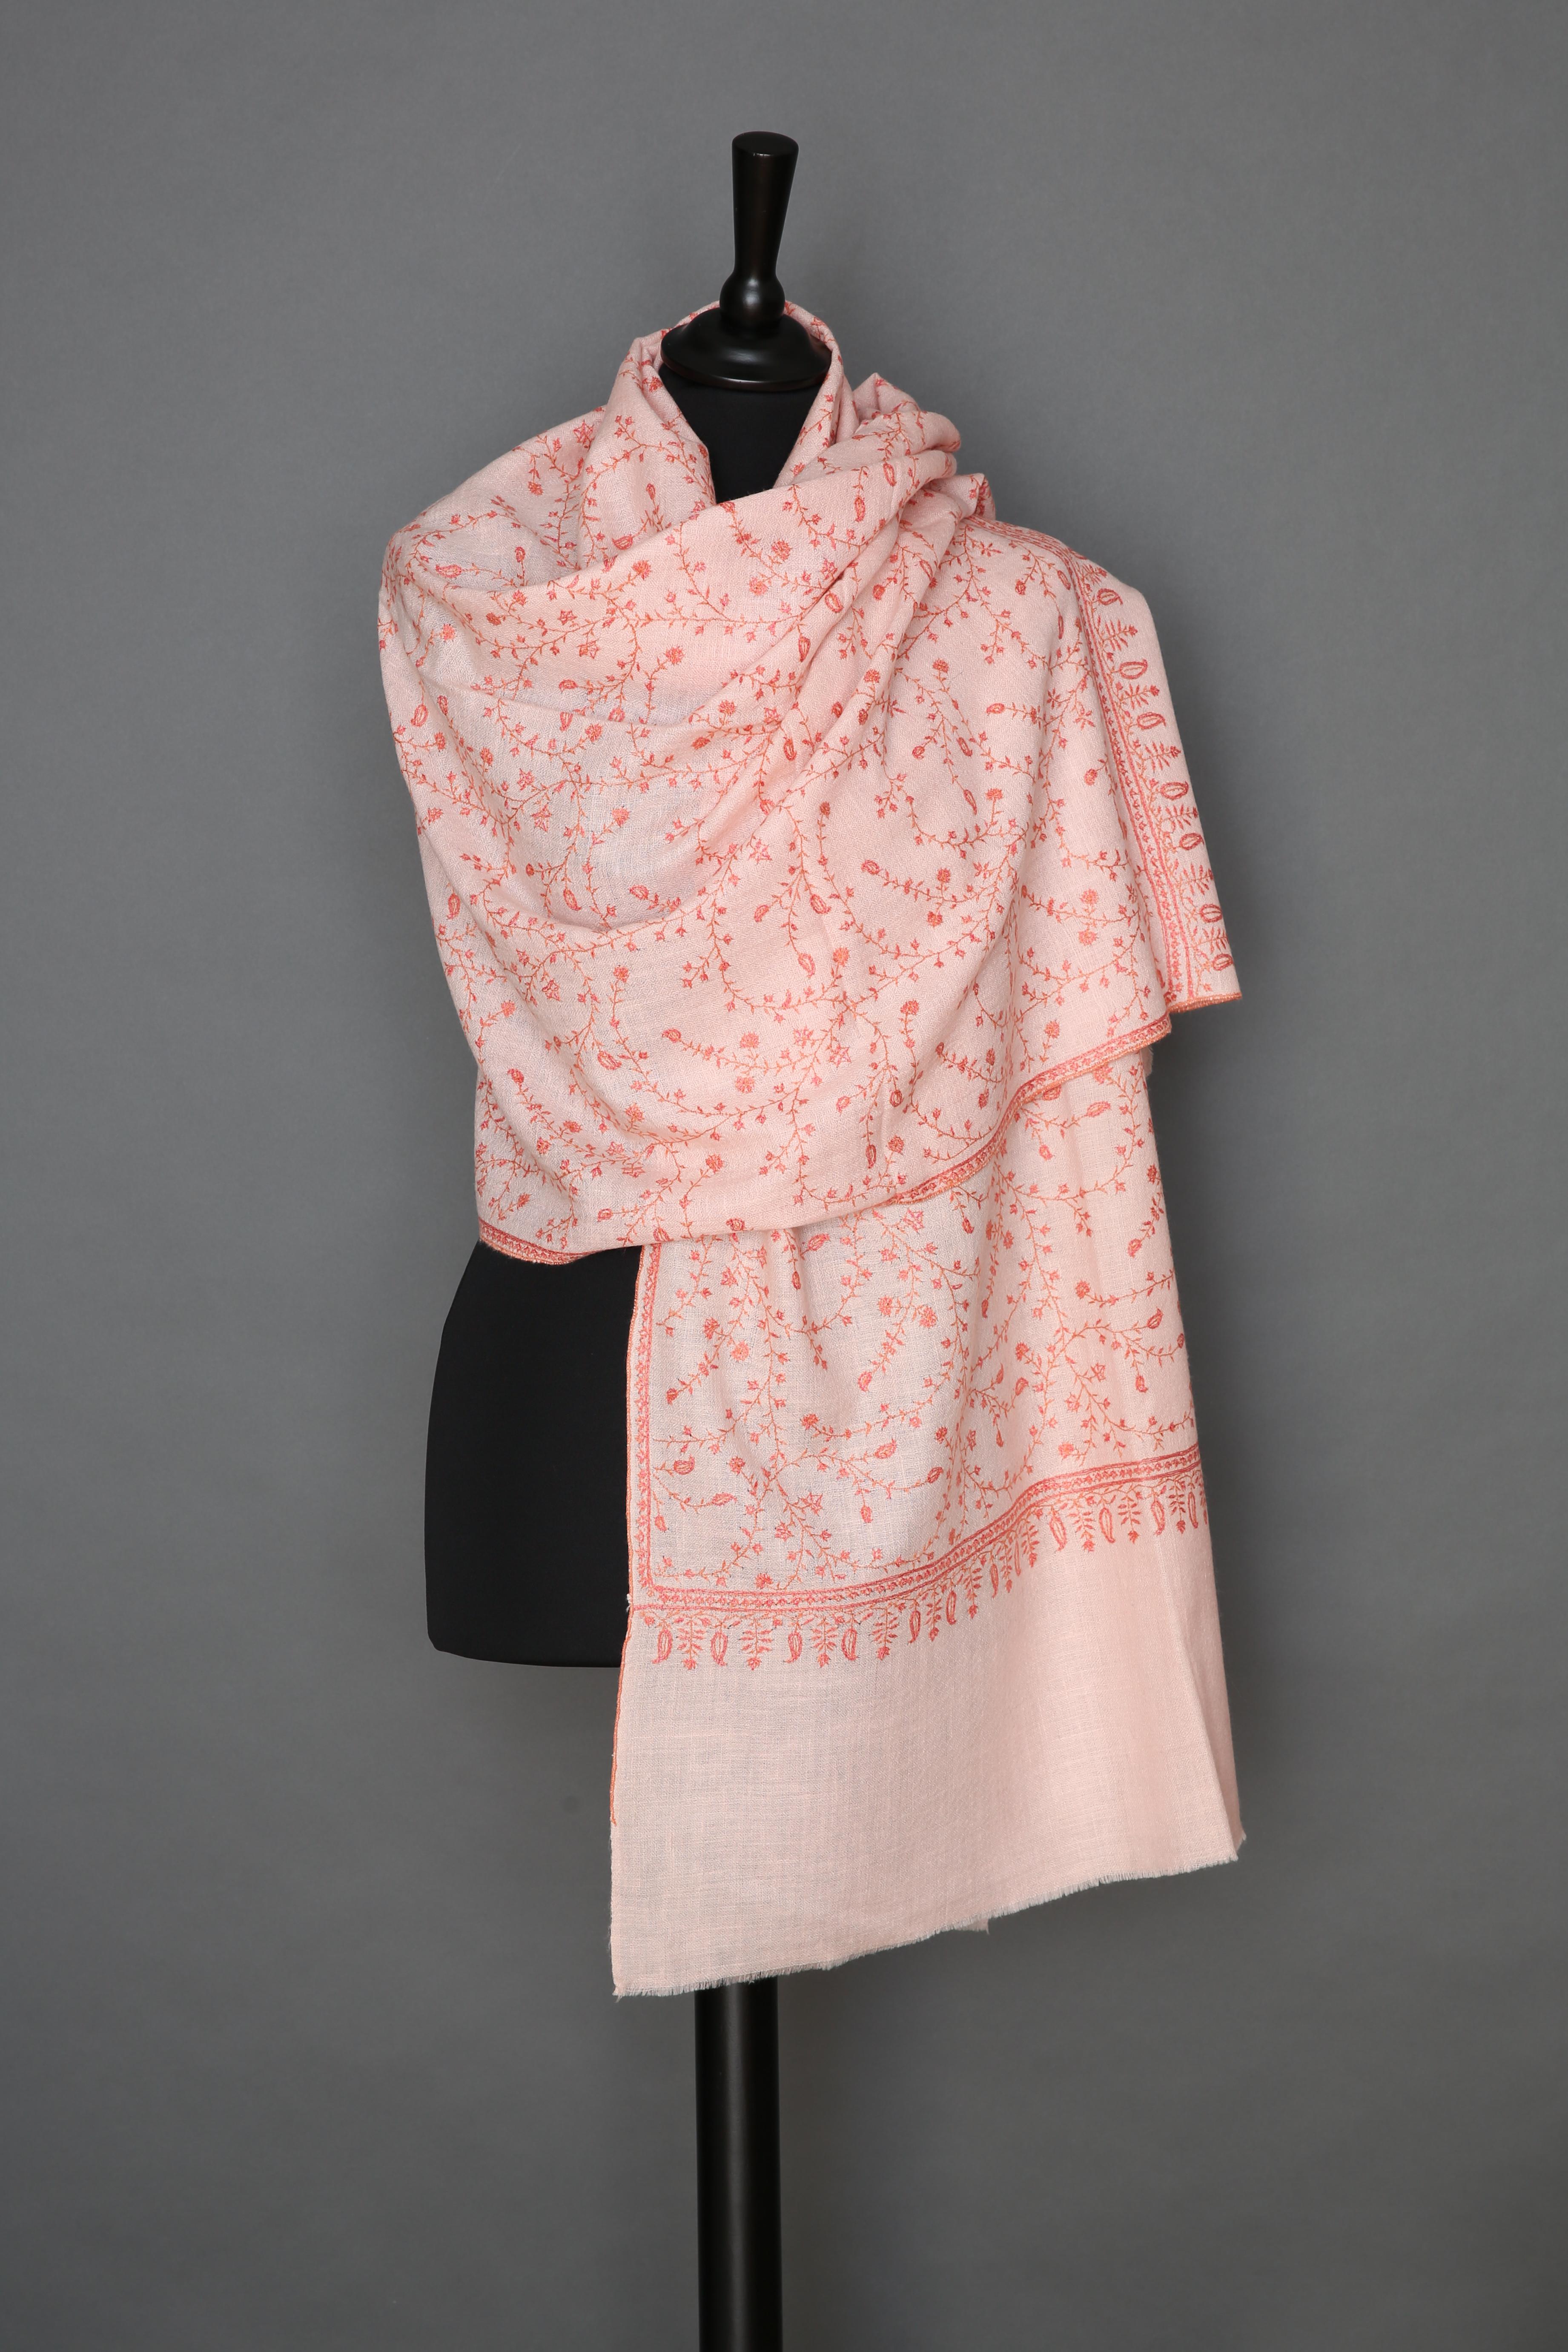 Women's or Men's Limited Edition Hand Embroidered Pale Pink 100% Cashmere Shawl - Brand New 